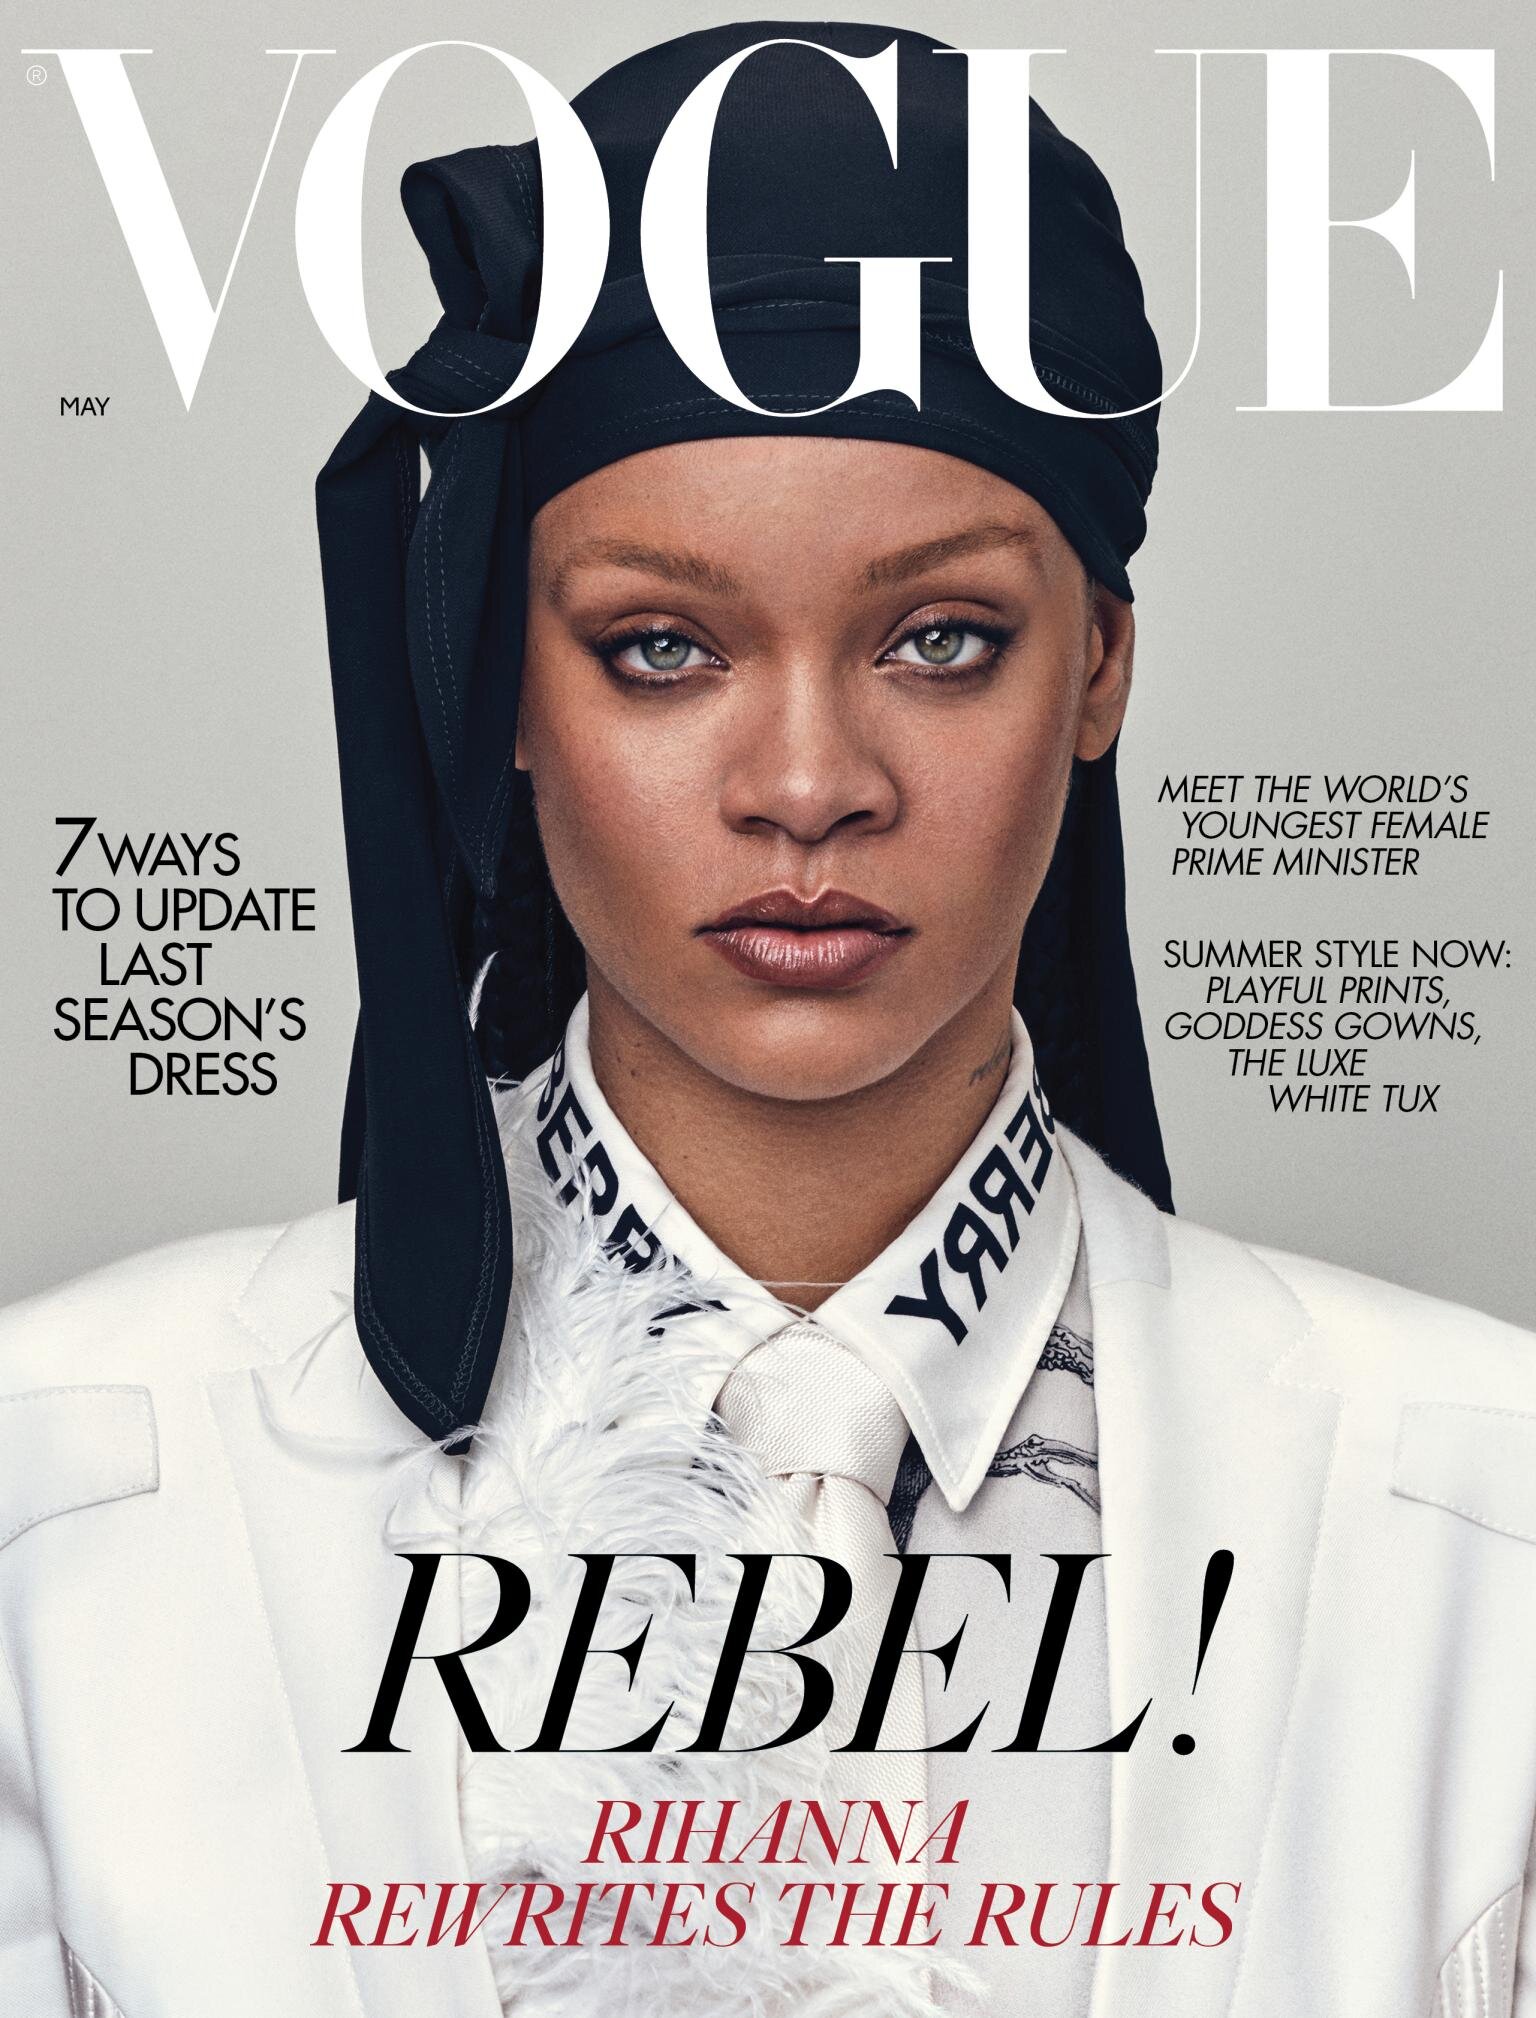 Vogue May Cover 1 (1).jpg